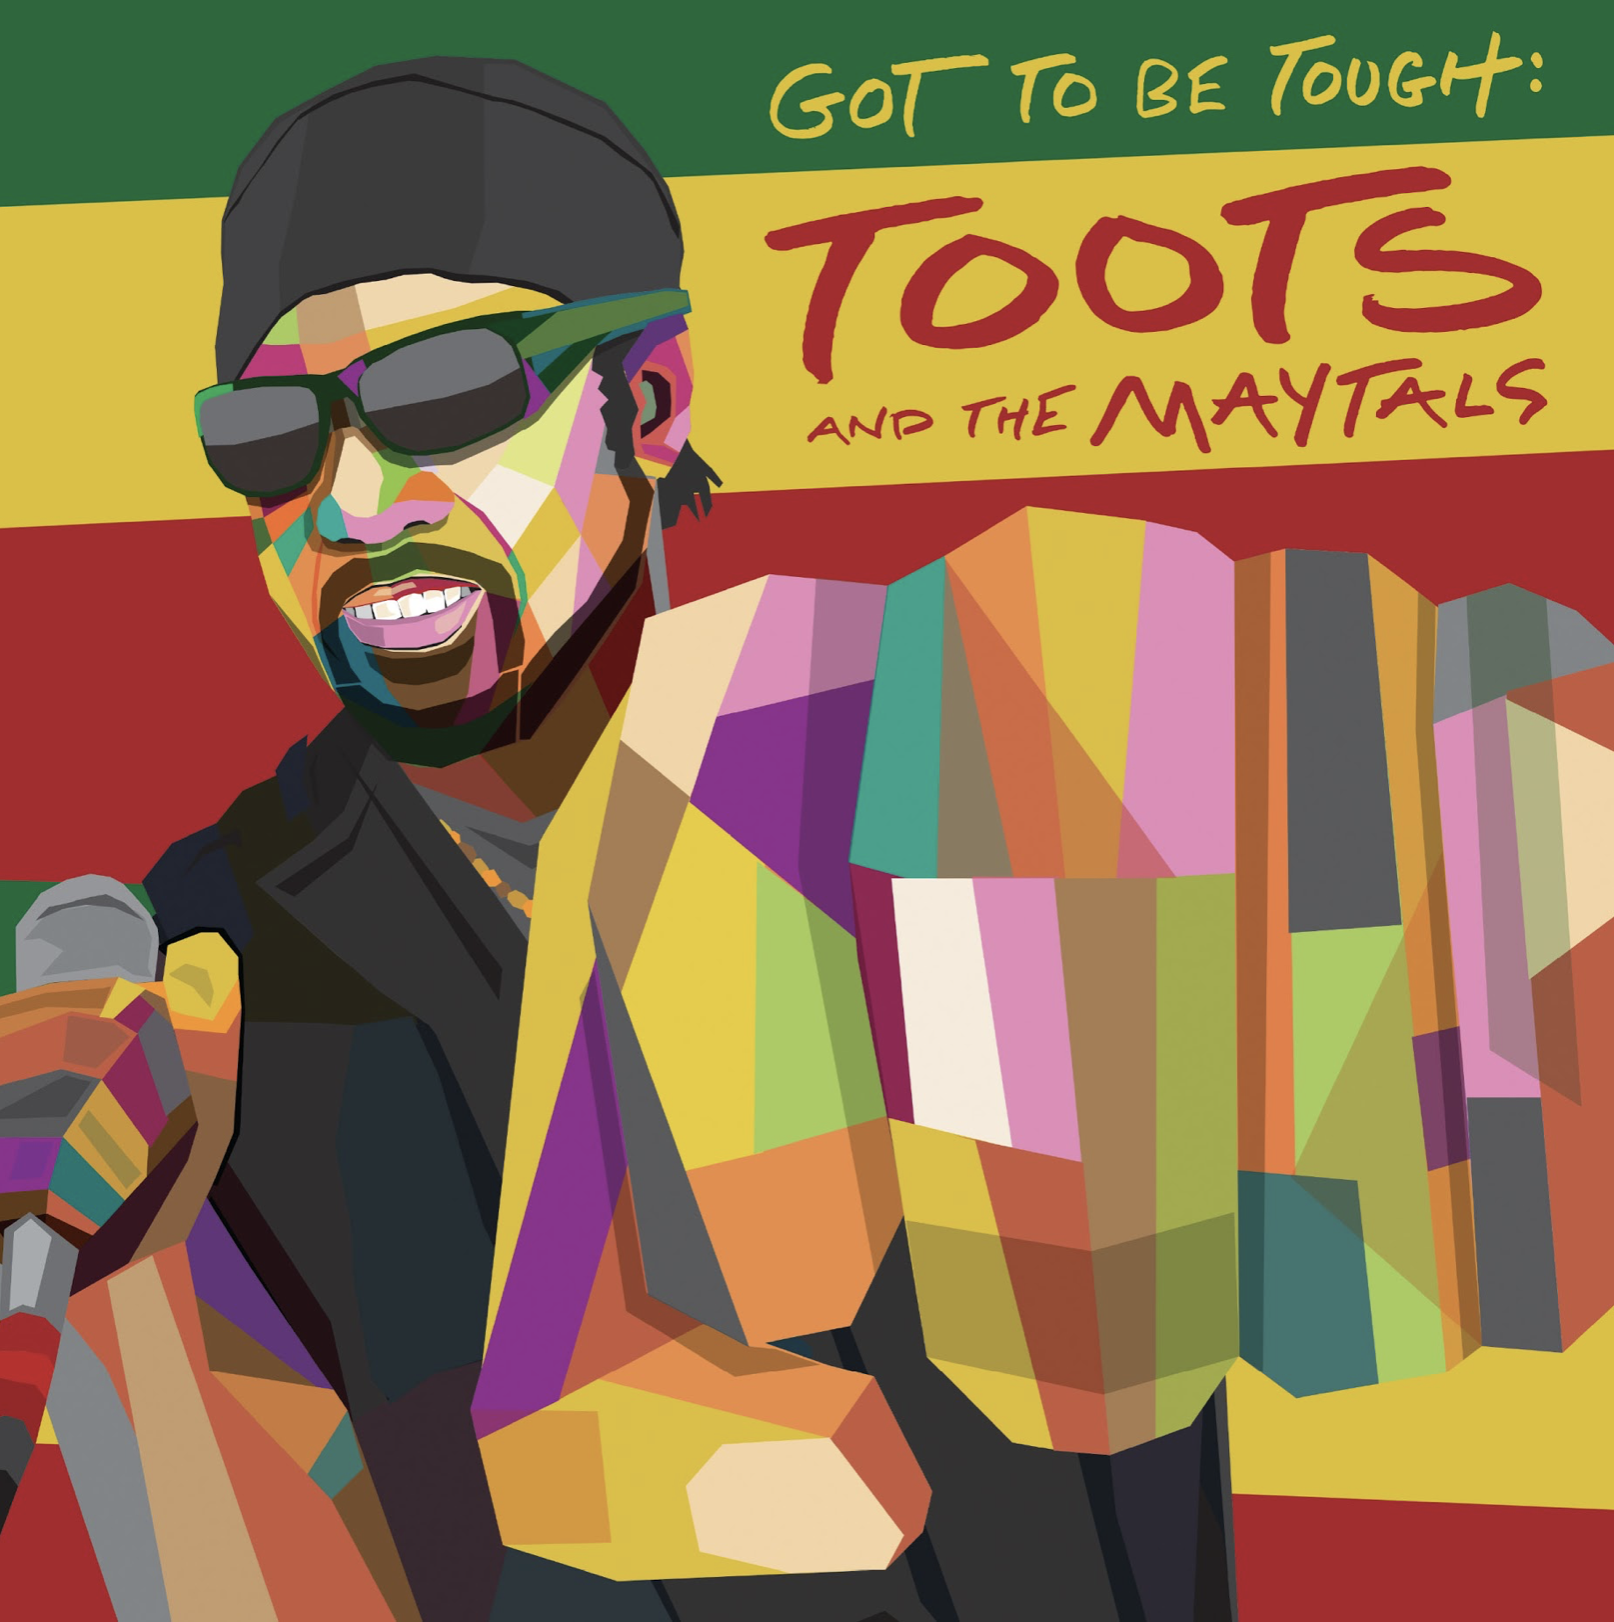 Got To Be Tough: ilritorno discografico di Toots and the Maytals